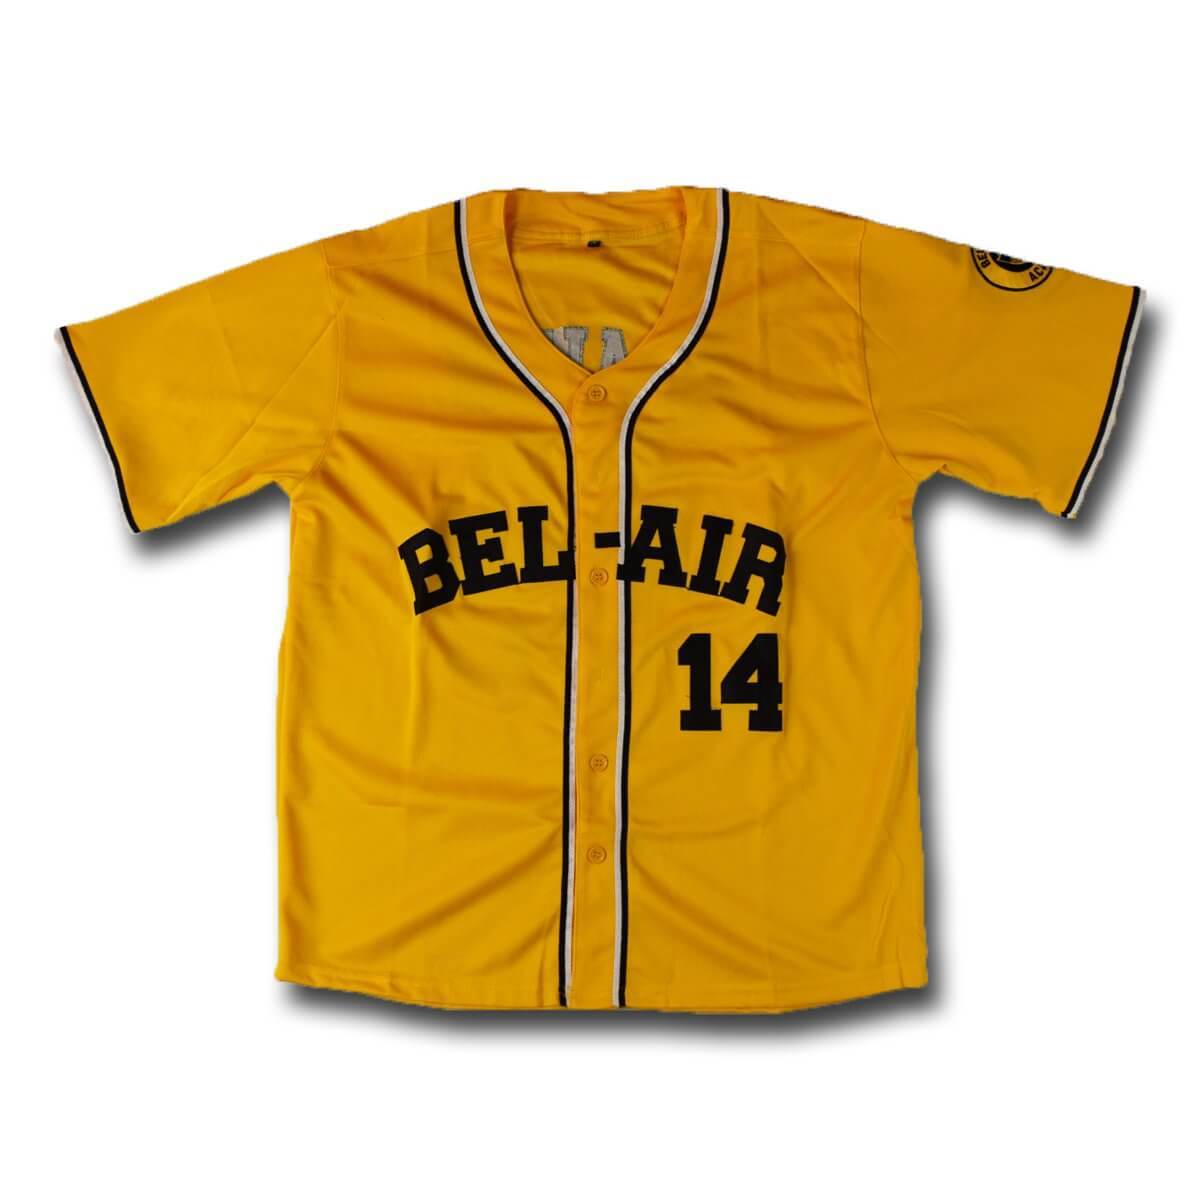 Fresh Prince of Bel Air Baseball Jersey Will Smith #14, 2XL